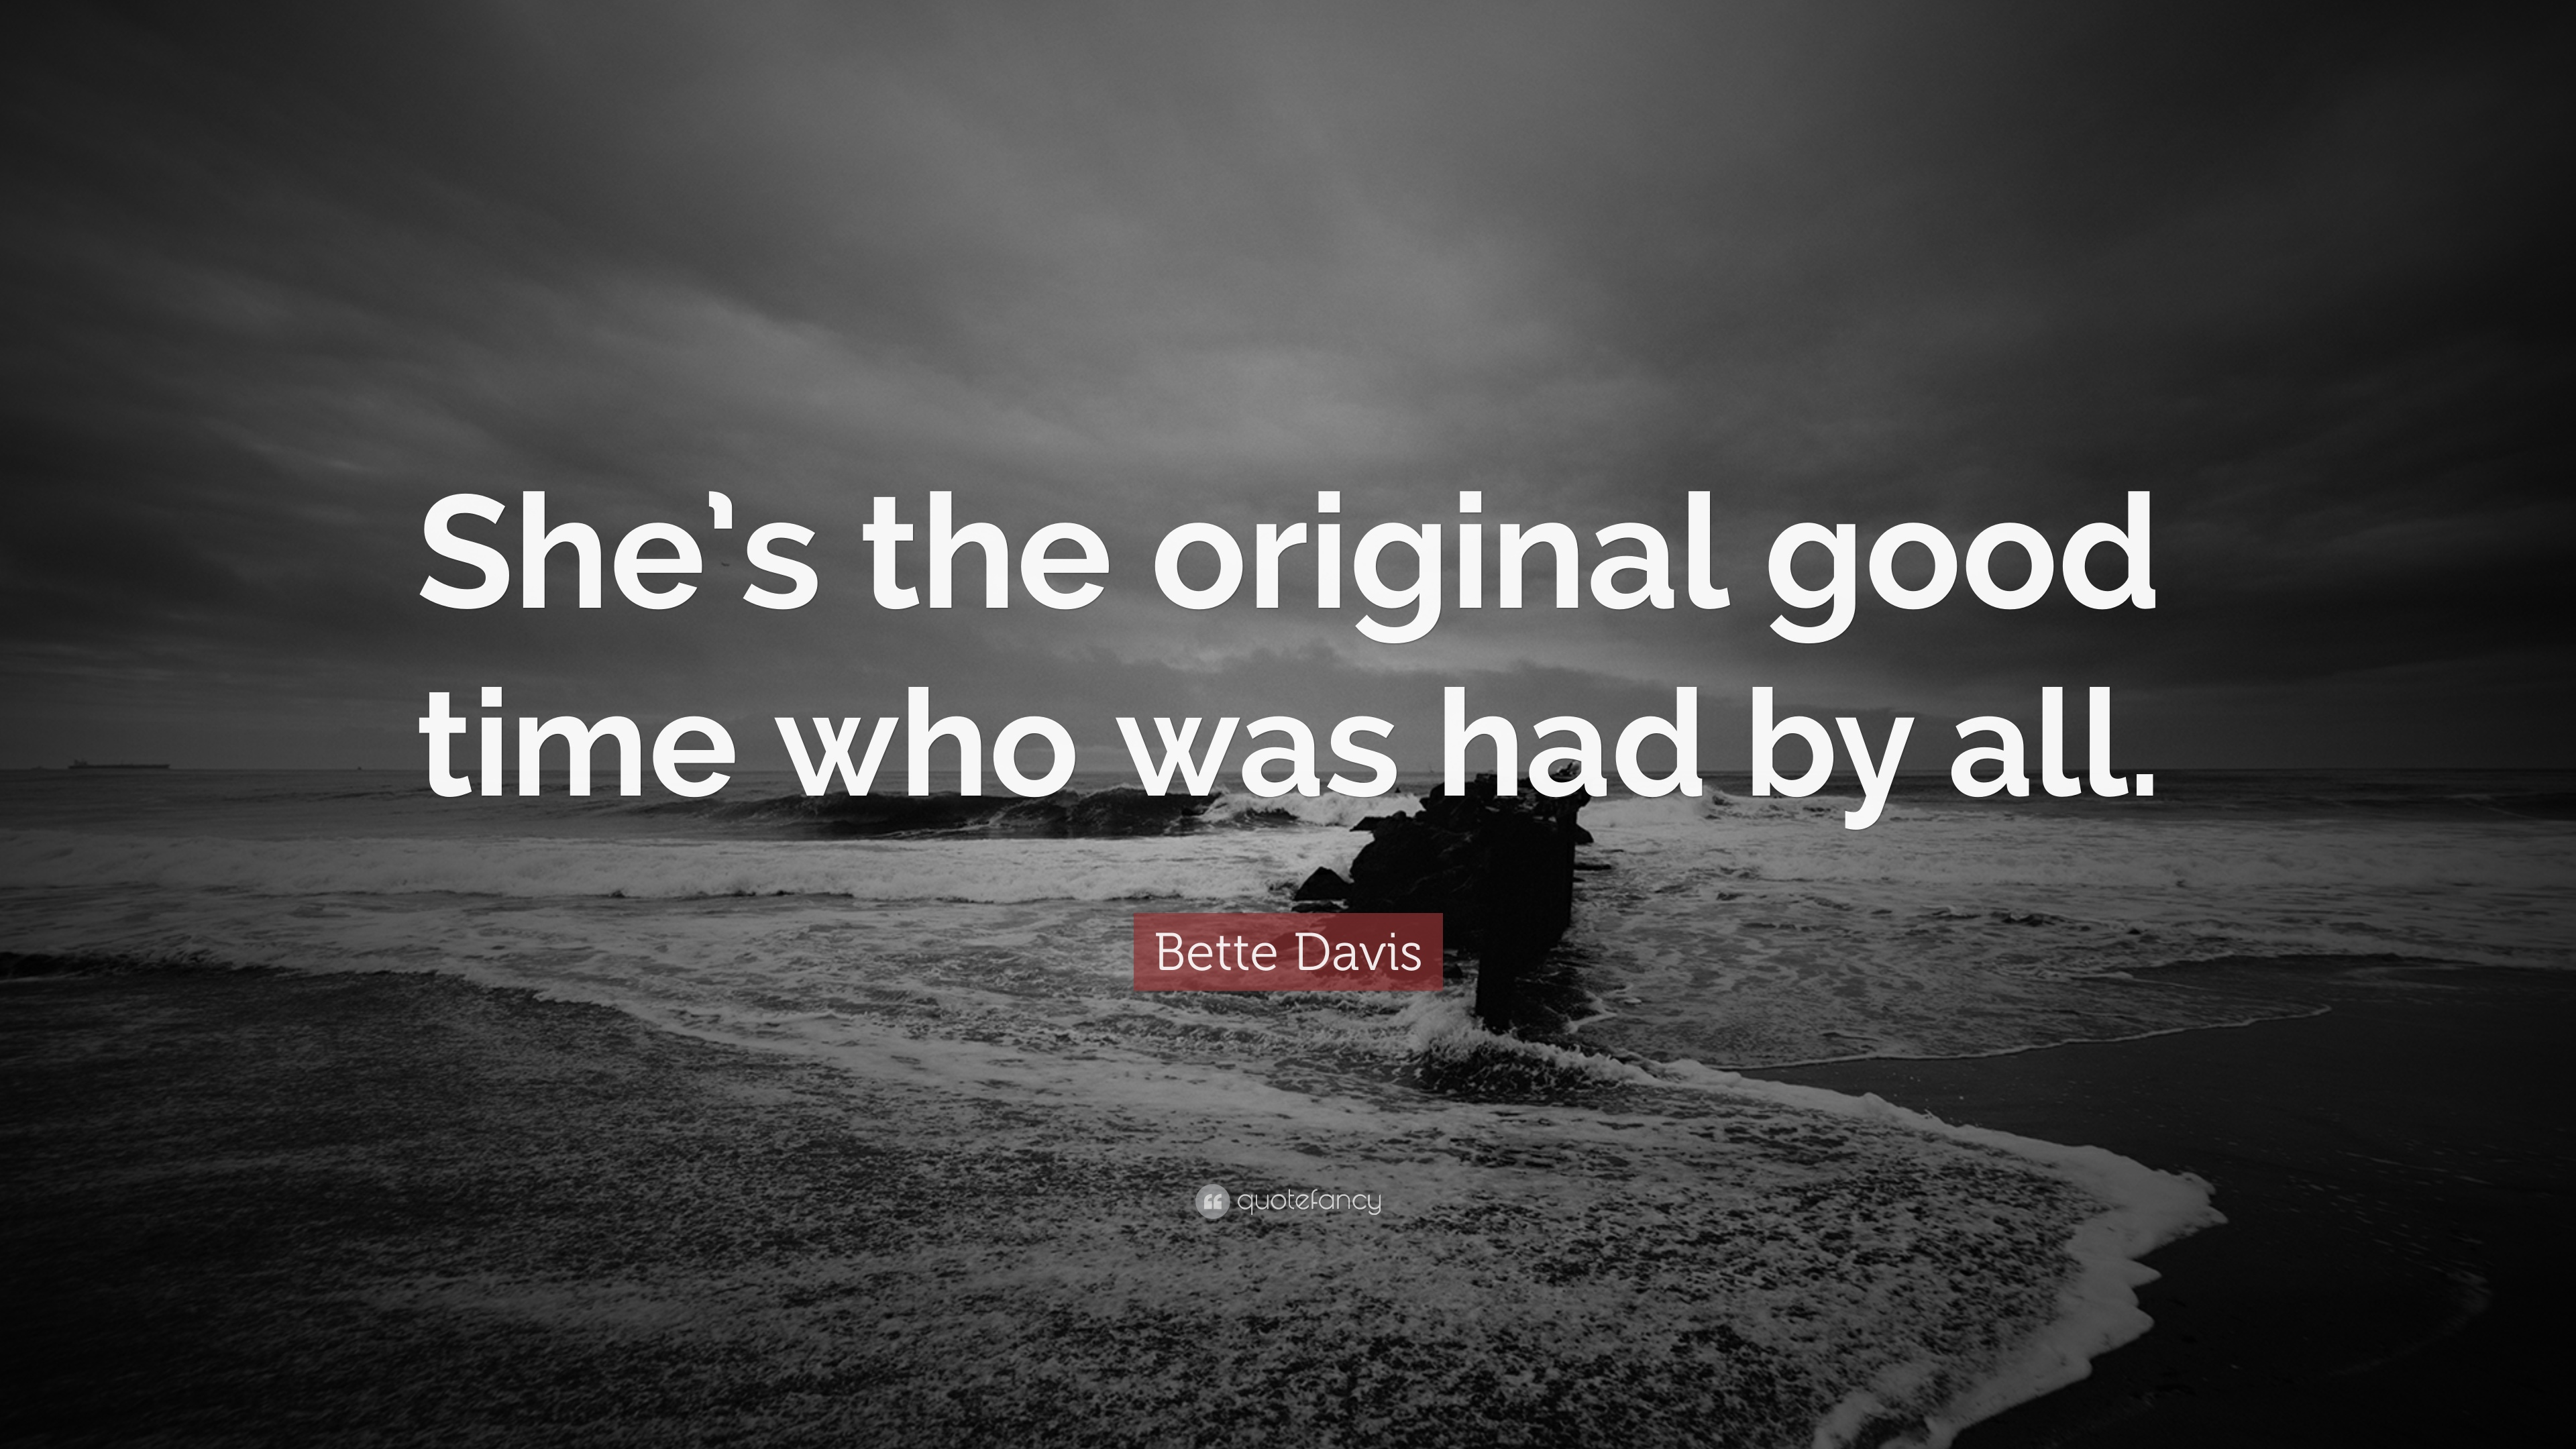 Bette Davis Quote: “She's the original good time who was had